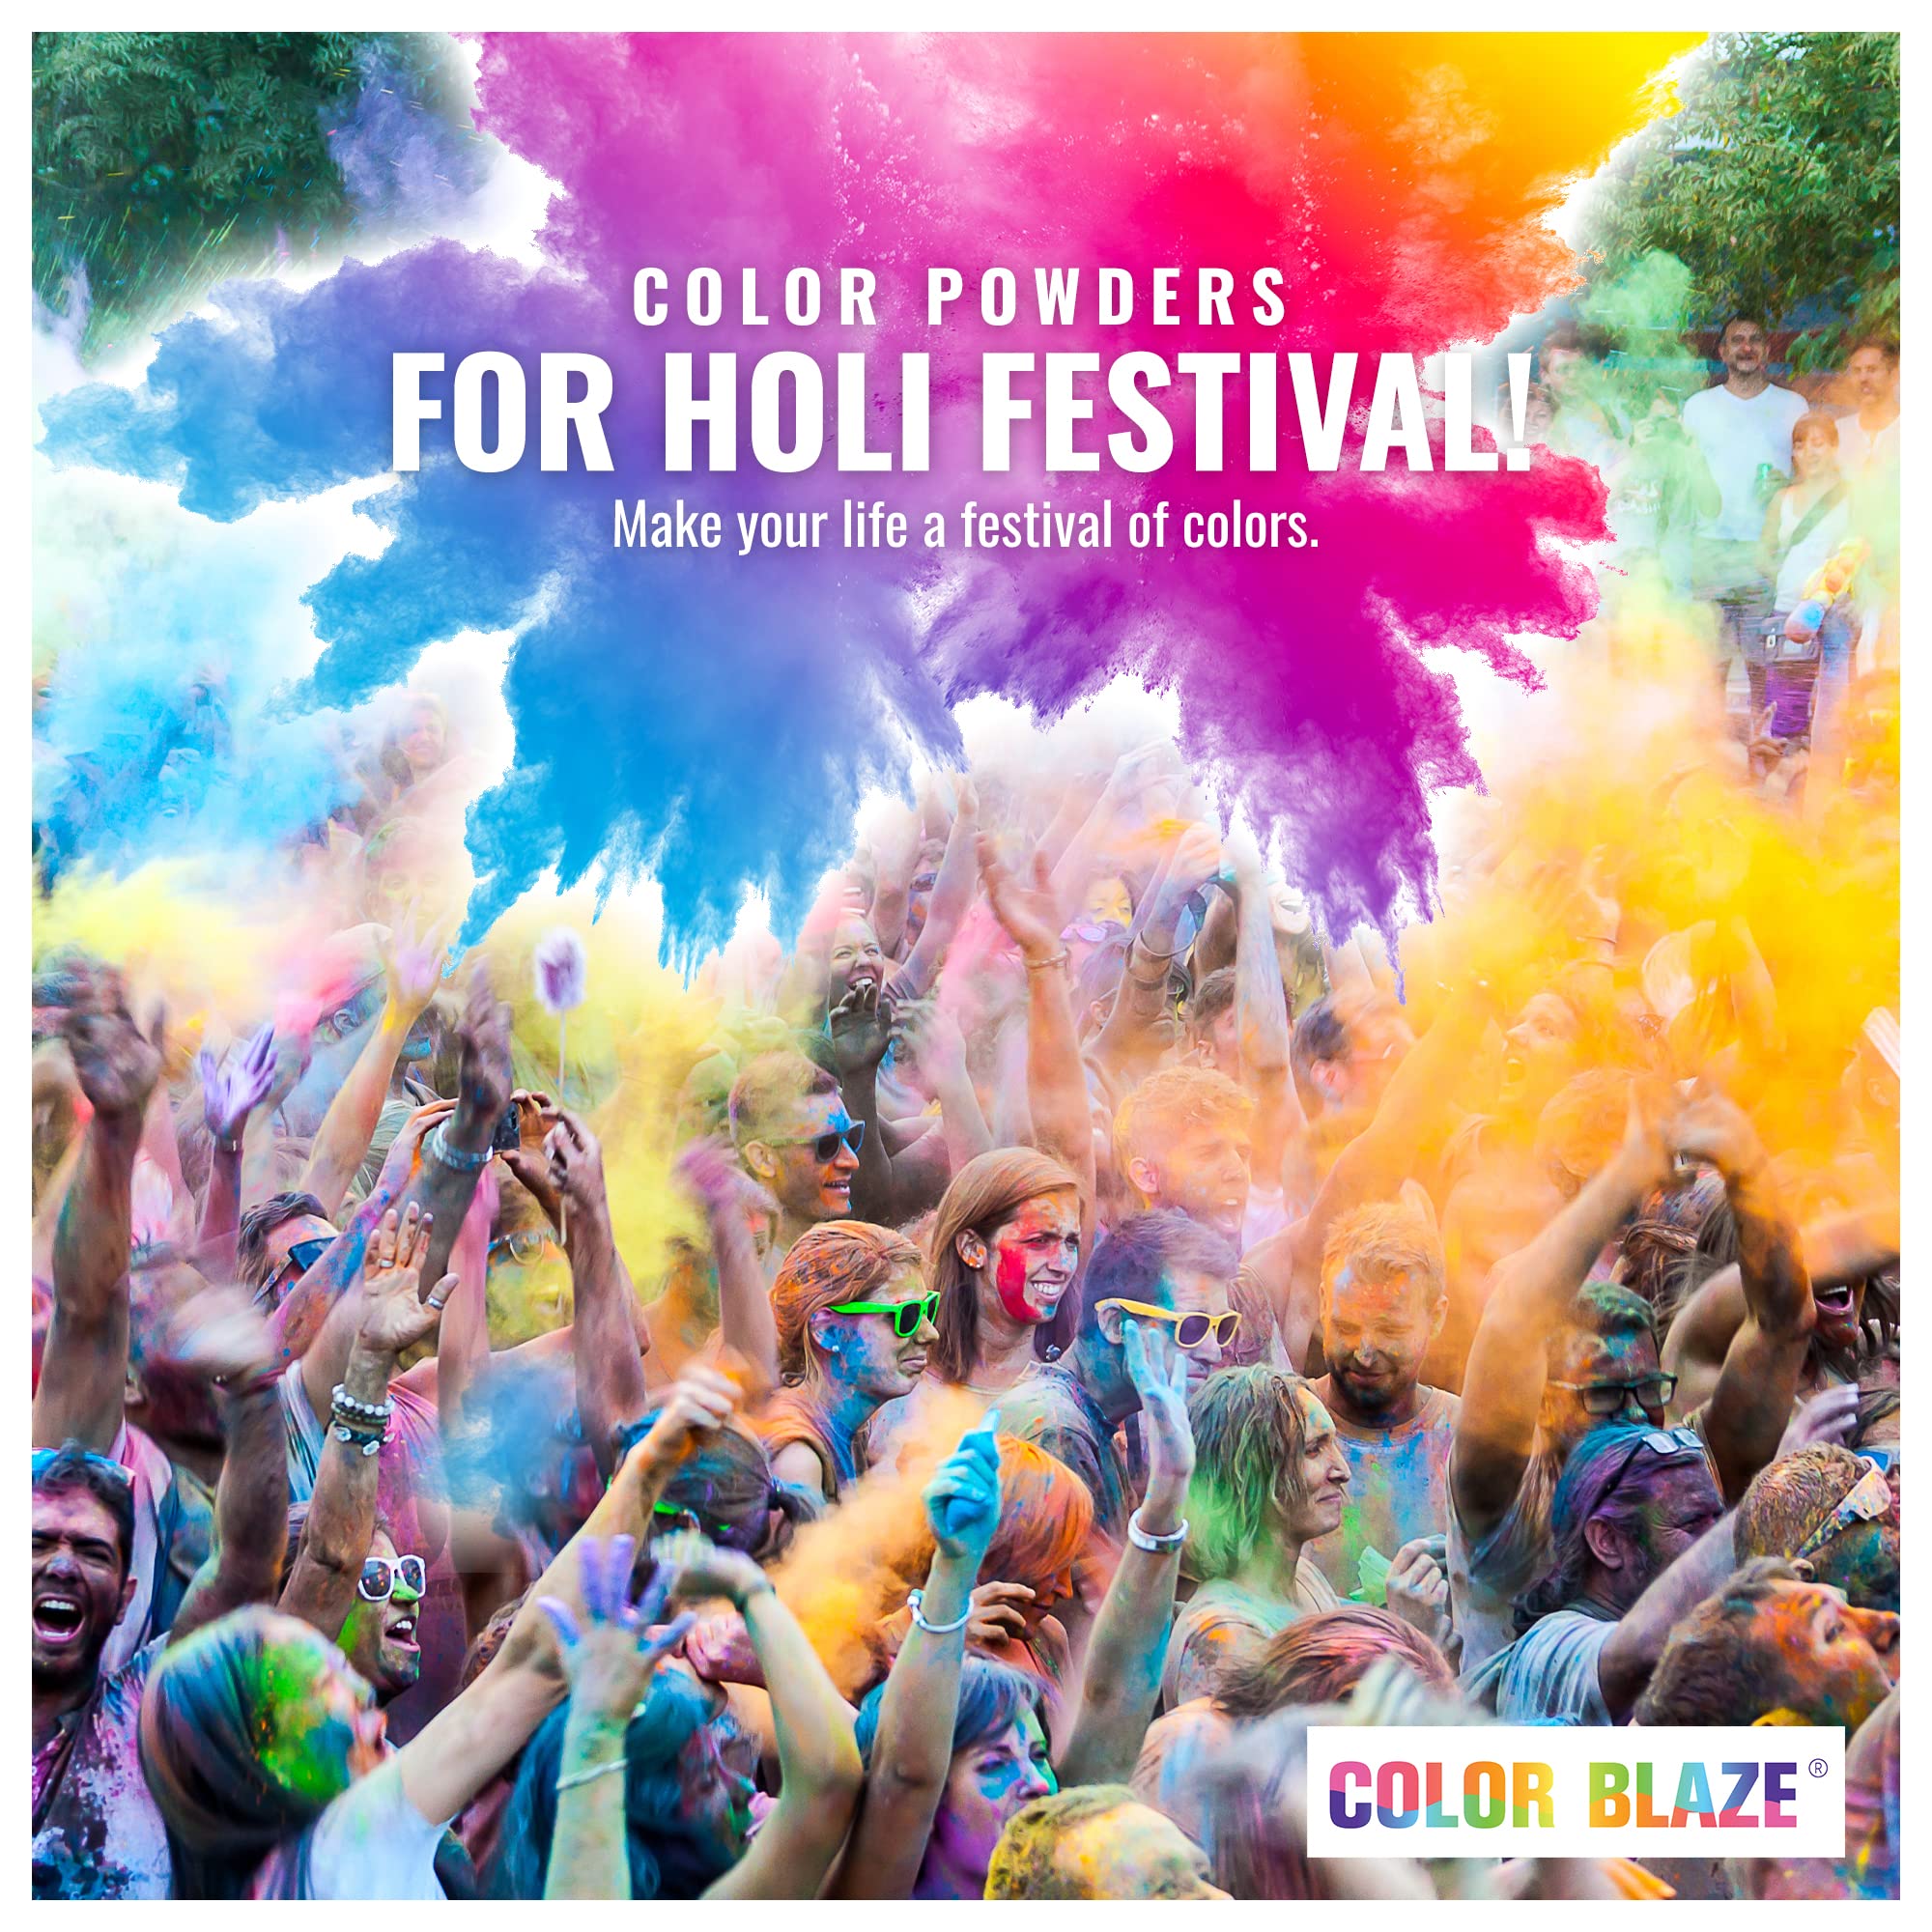 Color Blaze Holi Colored Powder - 5 lbs of Each Color - Pink, Orange, Yellow, Teal, Blue - For Toss, Rangoli, Fun Run, War, Party & Festival - Pack of 5 Bags - 25 Pounds in Bulk